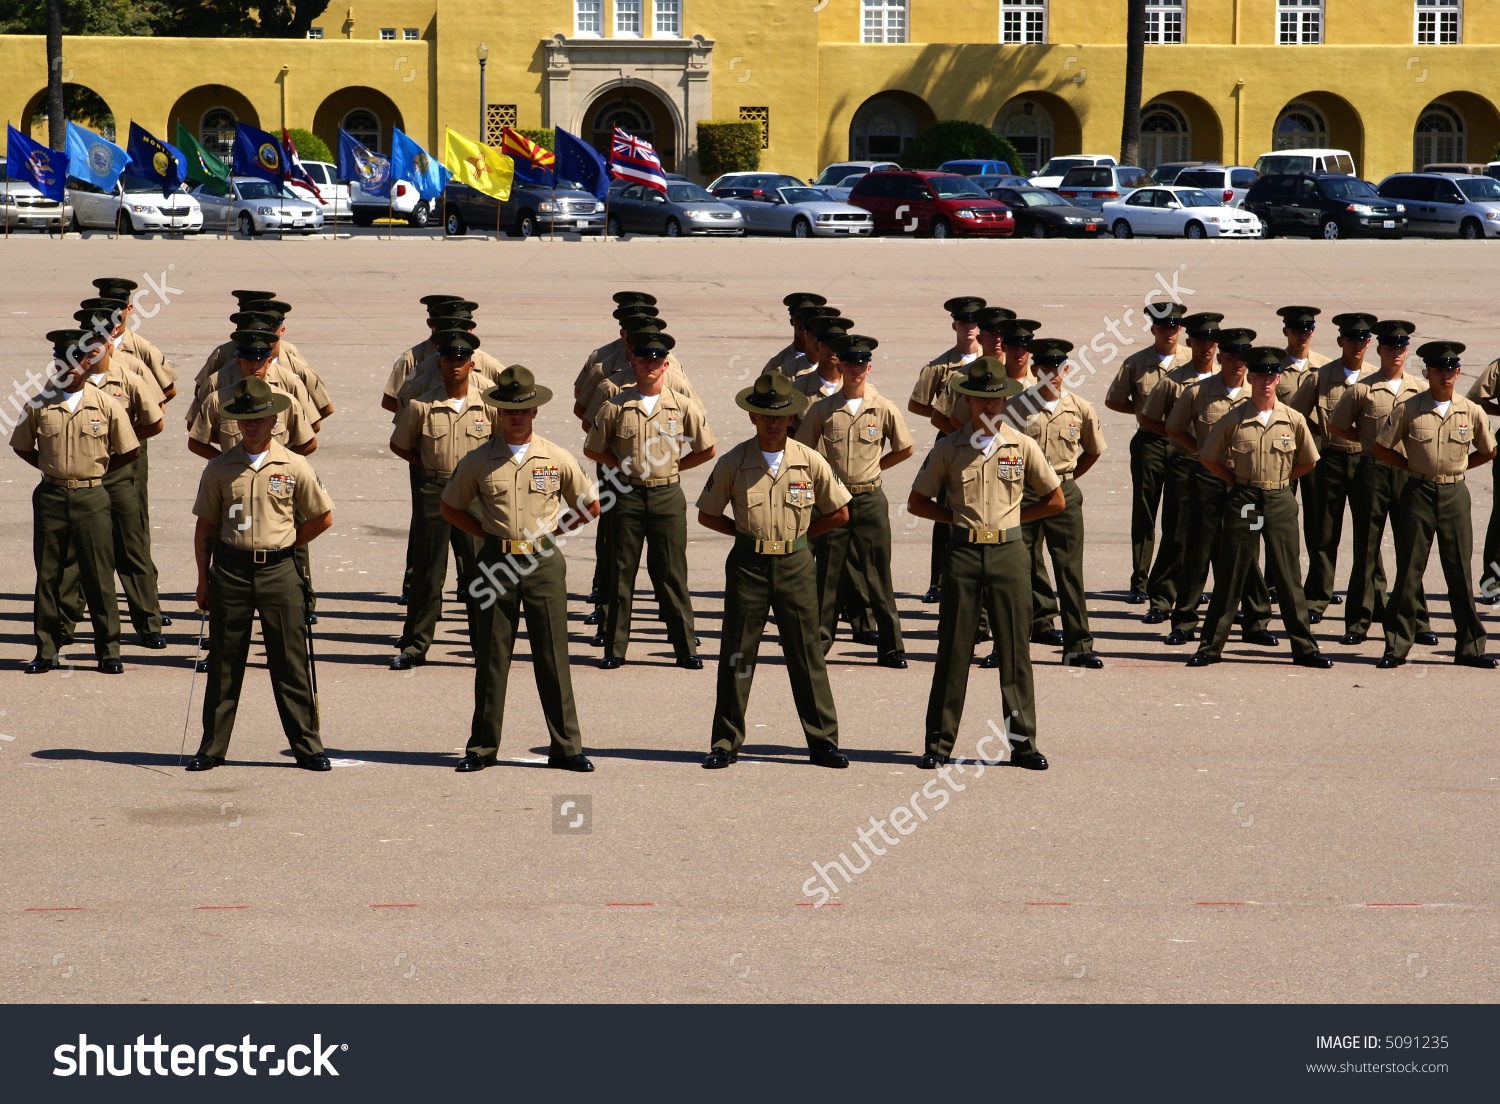 New Marines Standing Parade Rest Drill Stock Photo 5091235.